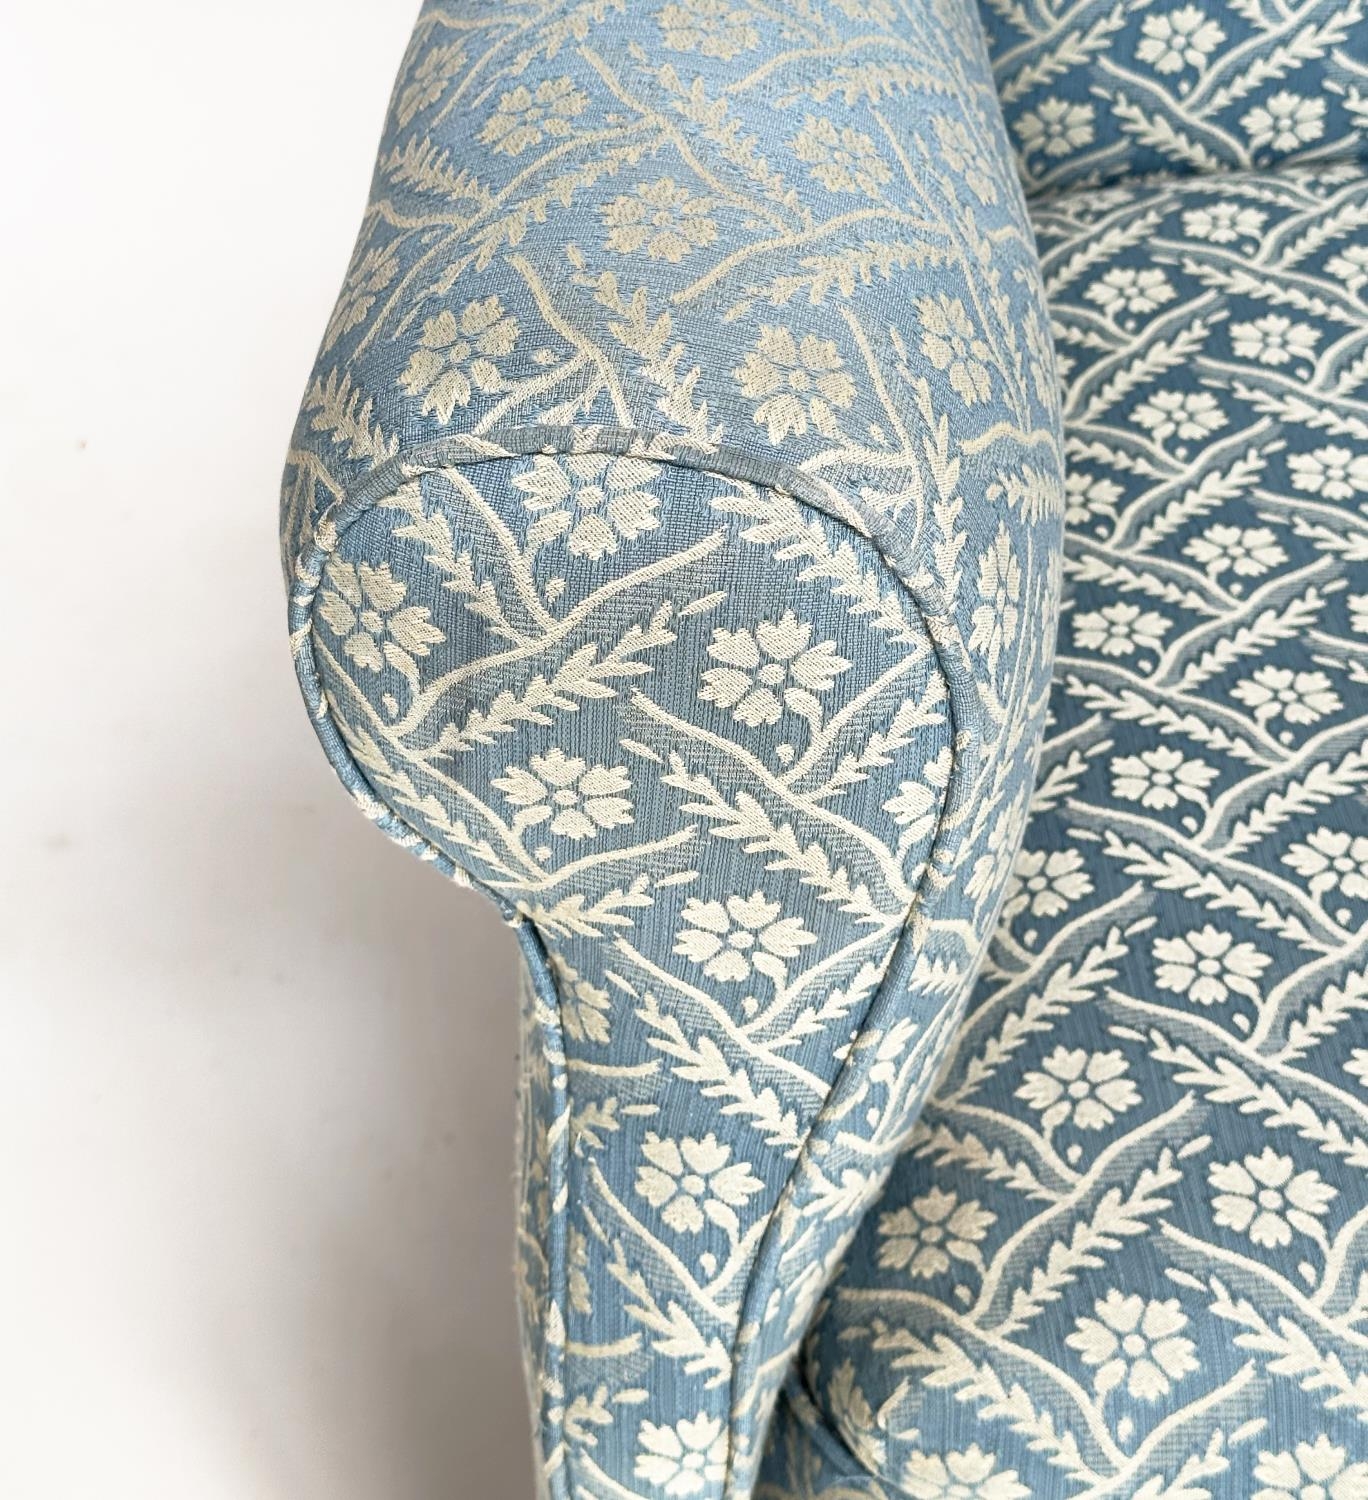 WING ARMCHAIR, Victorian geometric woven blue and white upholstered with scroll arms and turned - Image 6 of 6